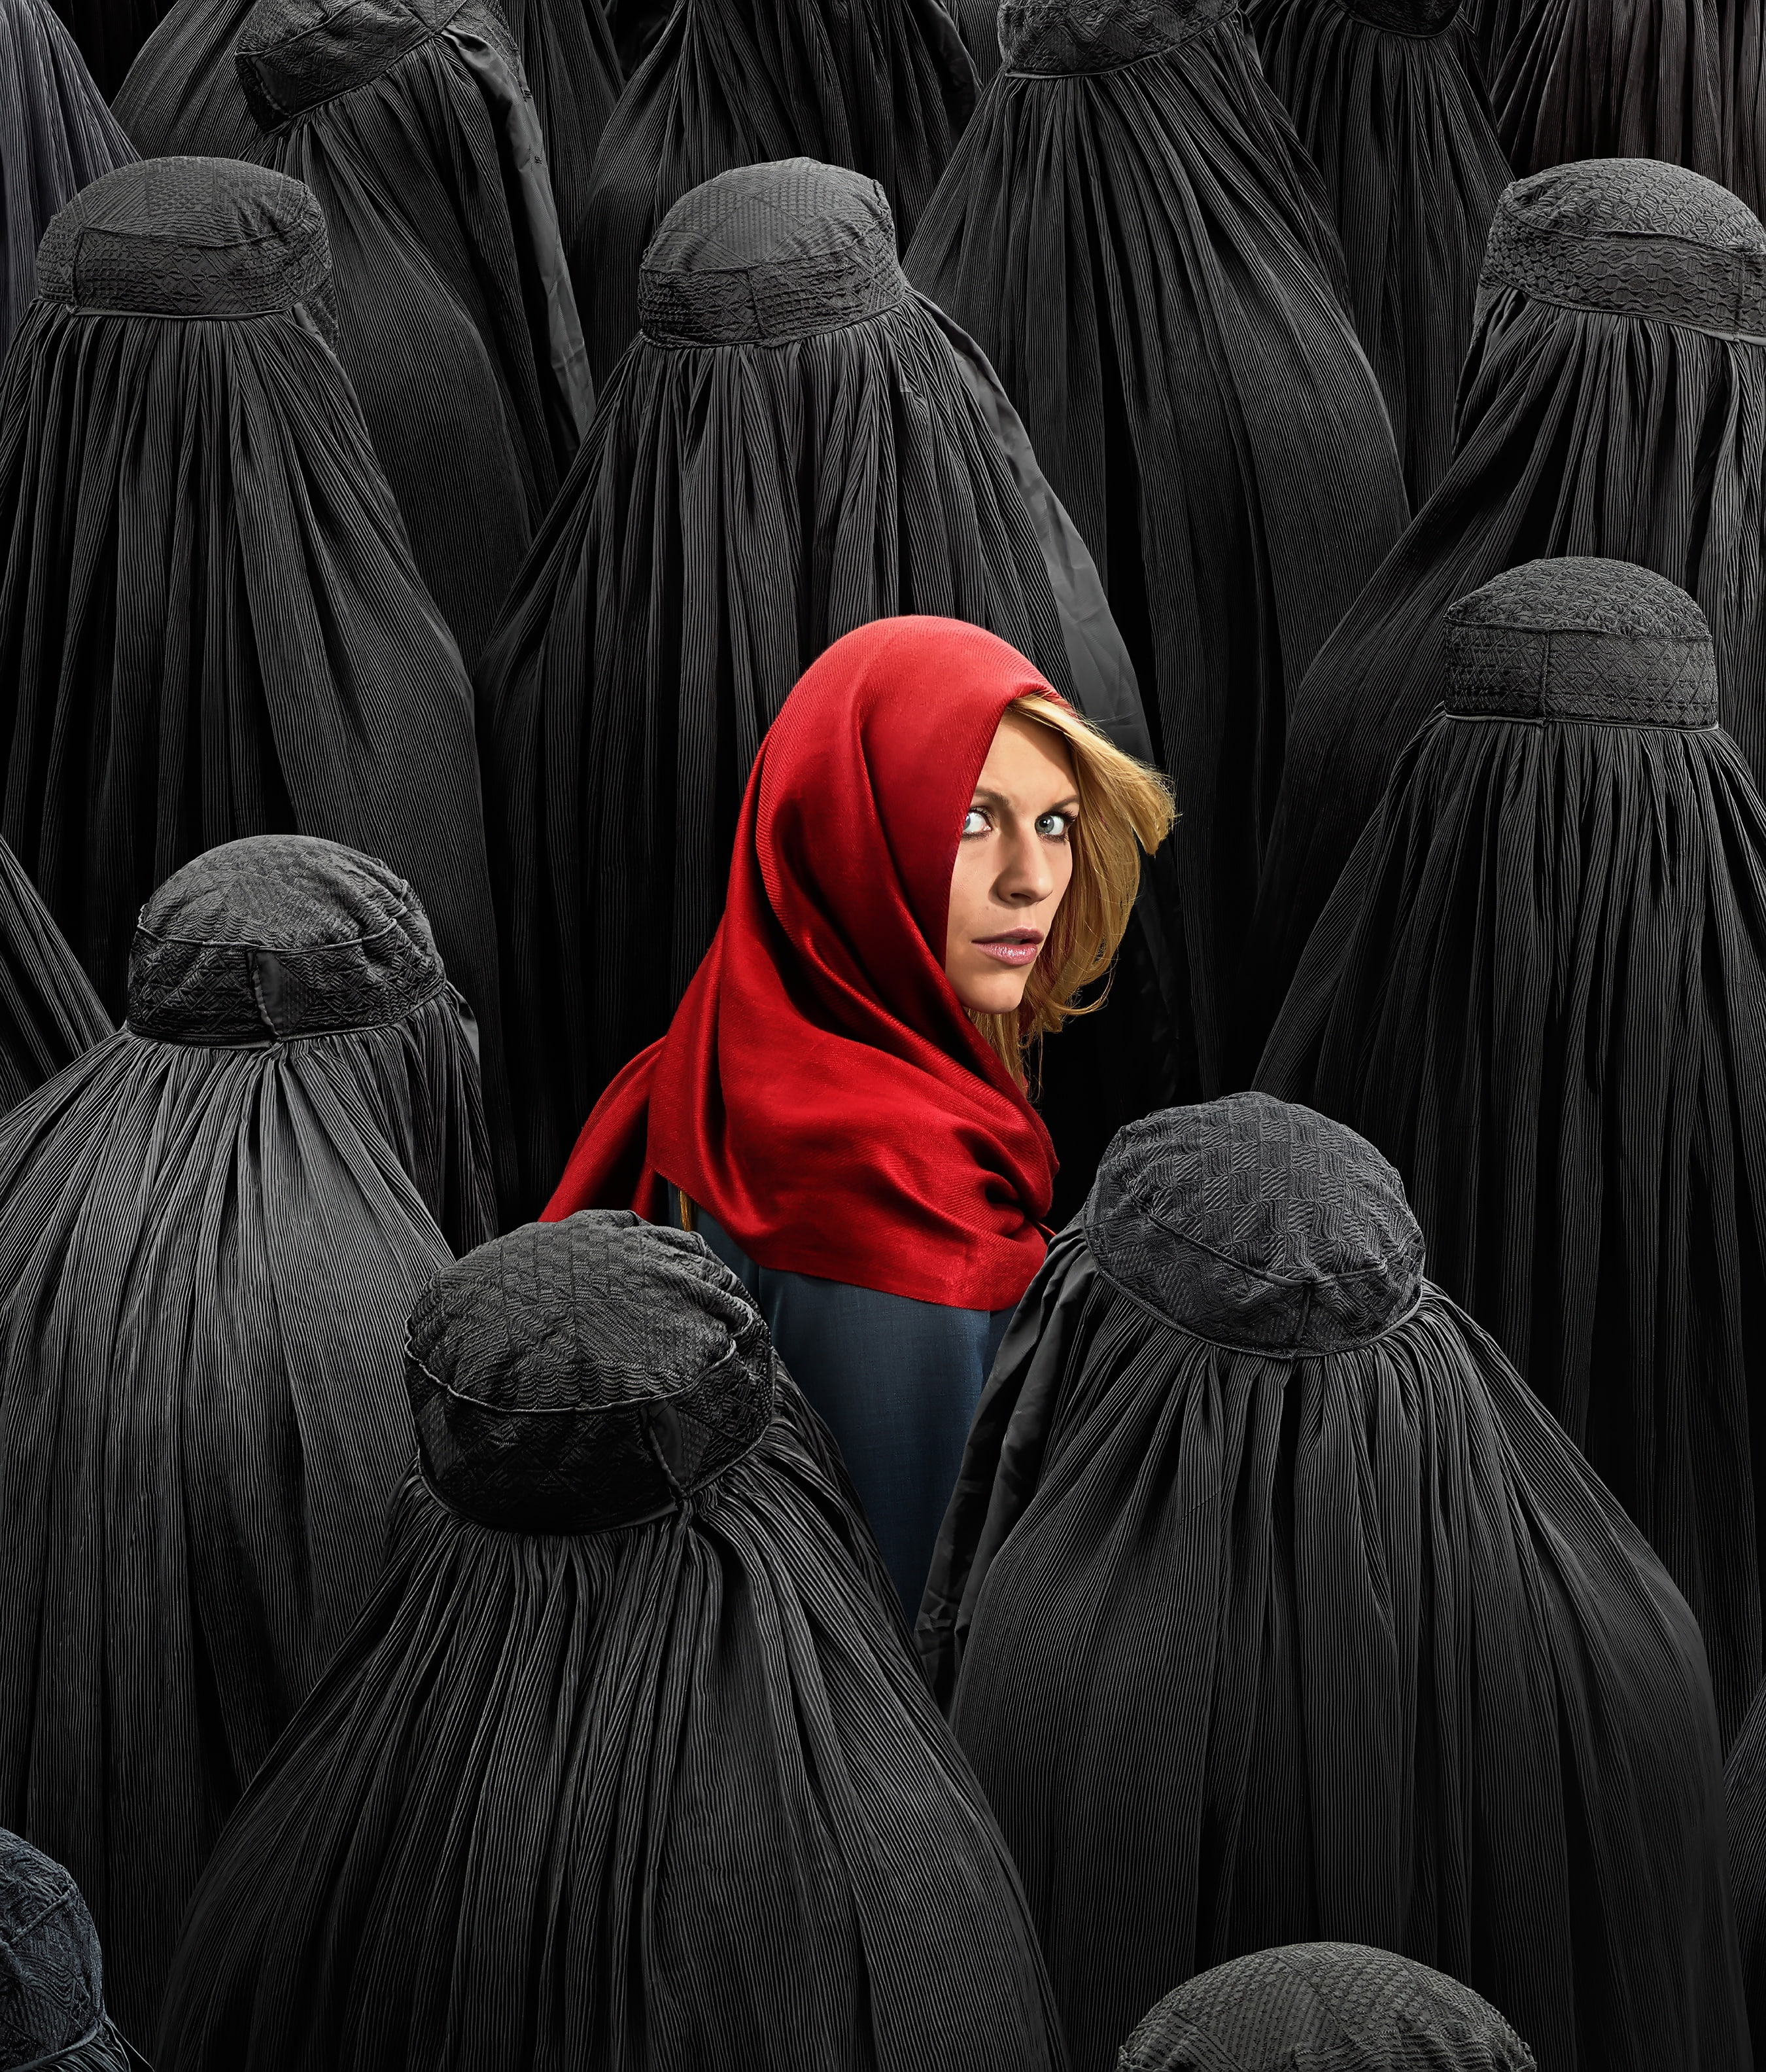 Claire Danes, Homeland, clothing, hijab, one person, traditional clothing